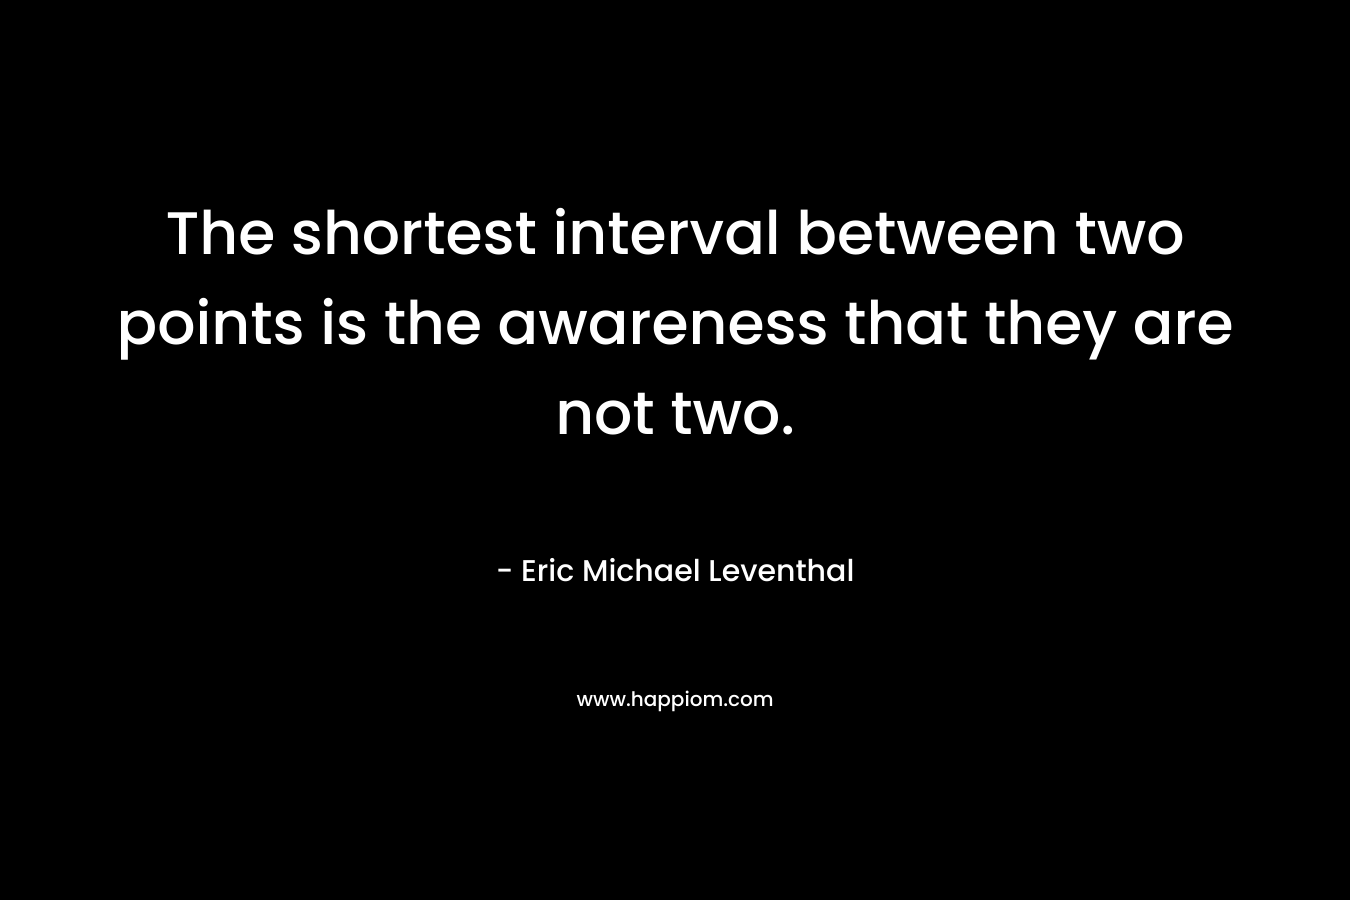 The shortest interval between two points is the awareness that they are not two.